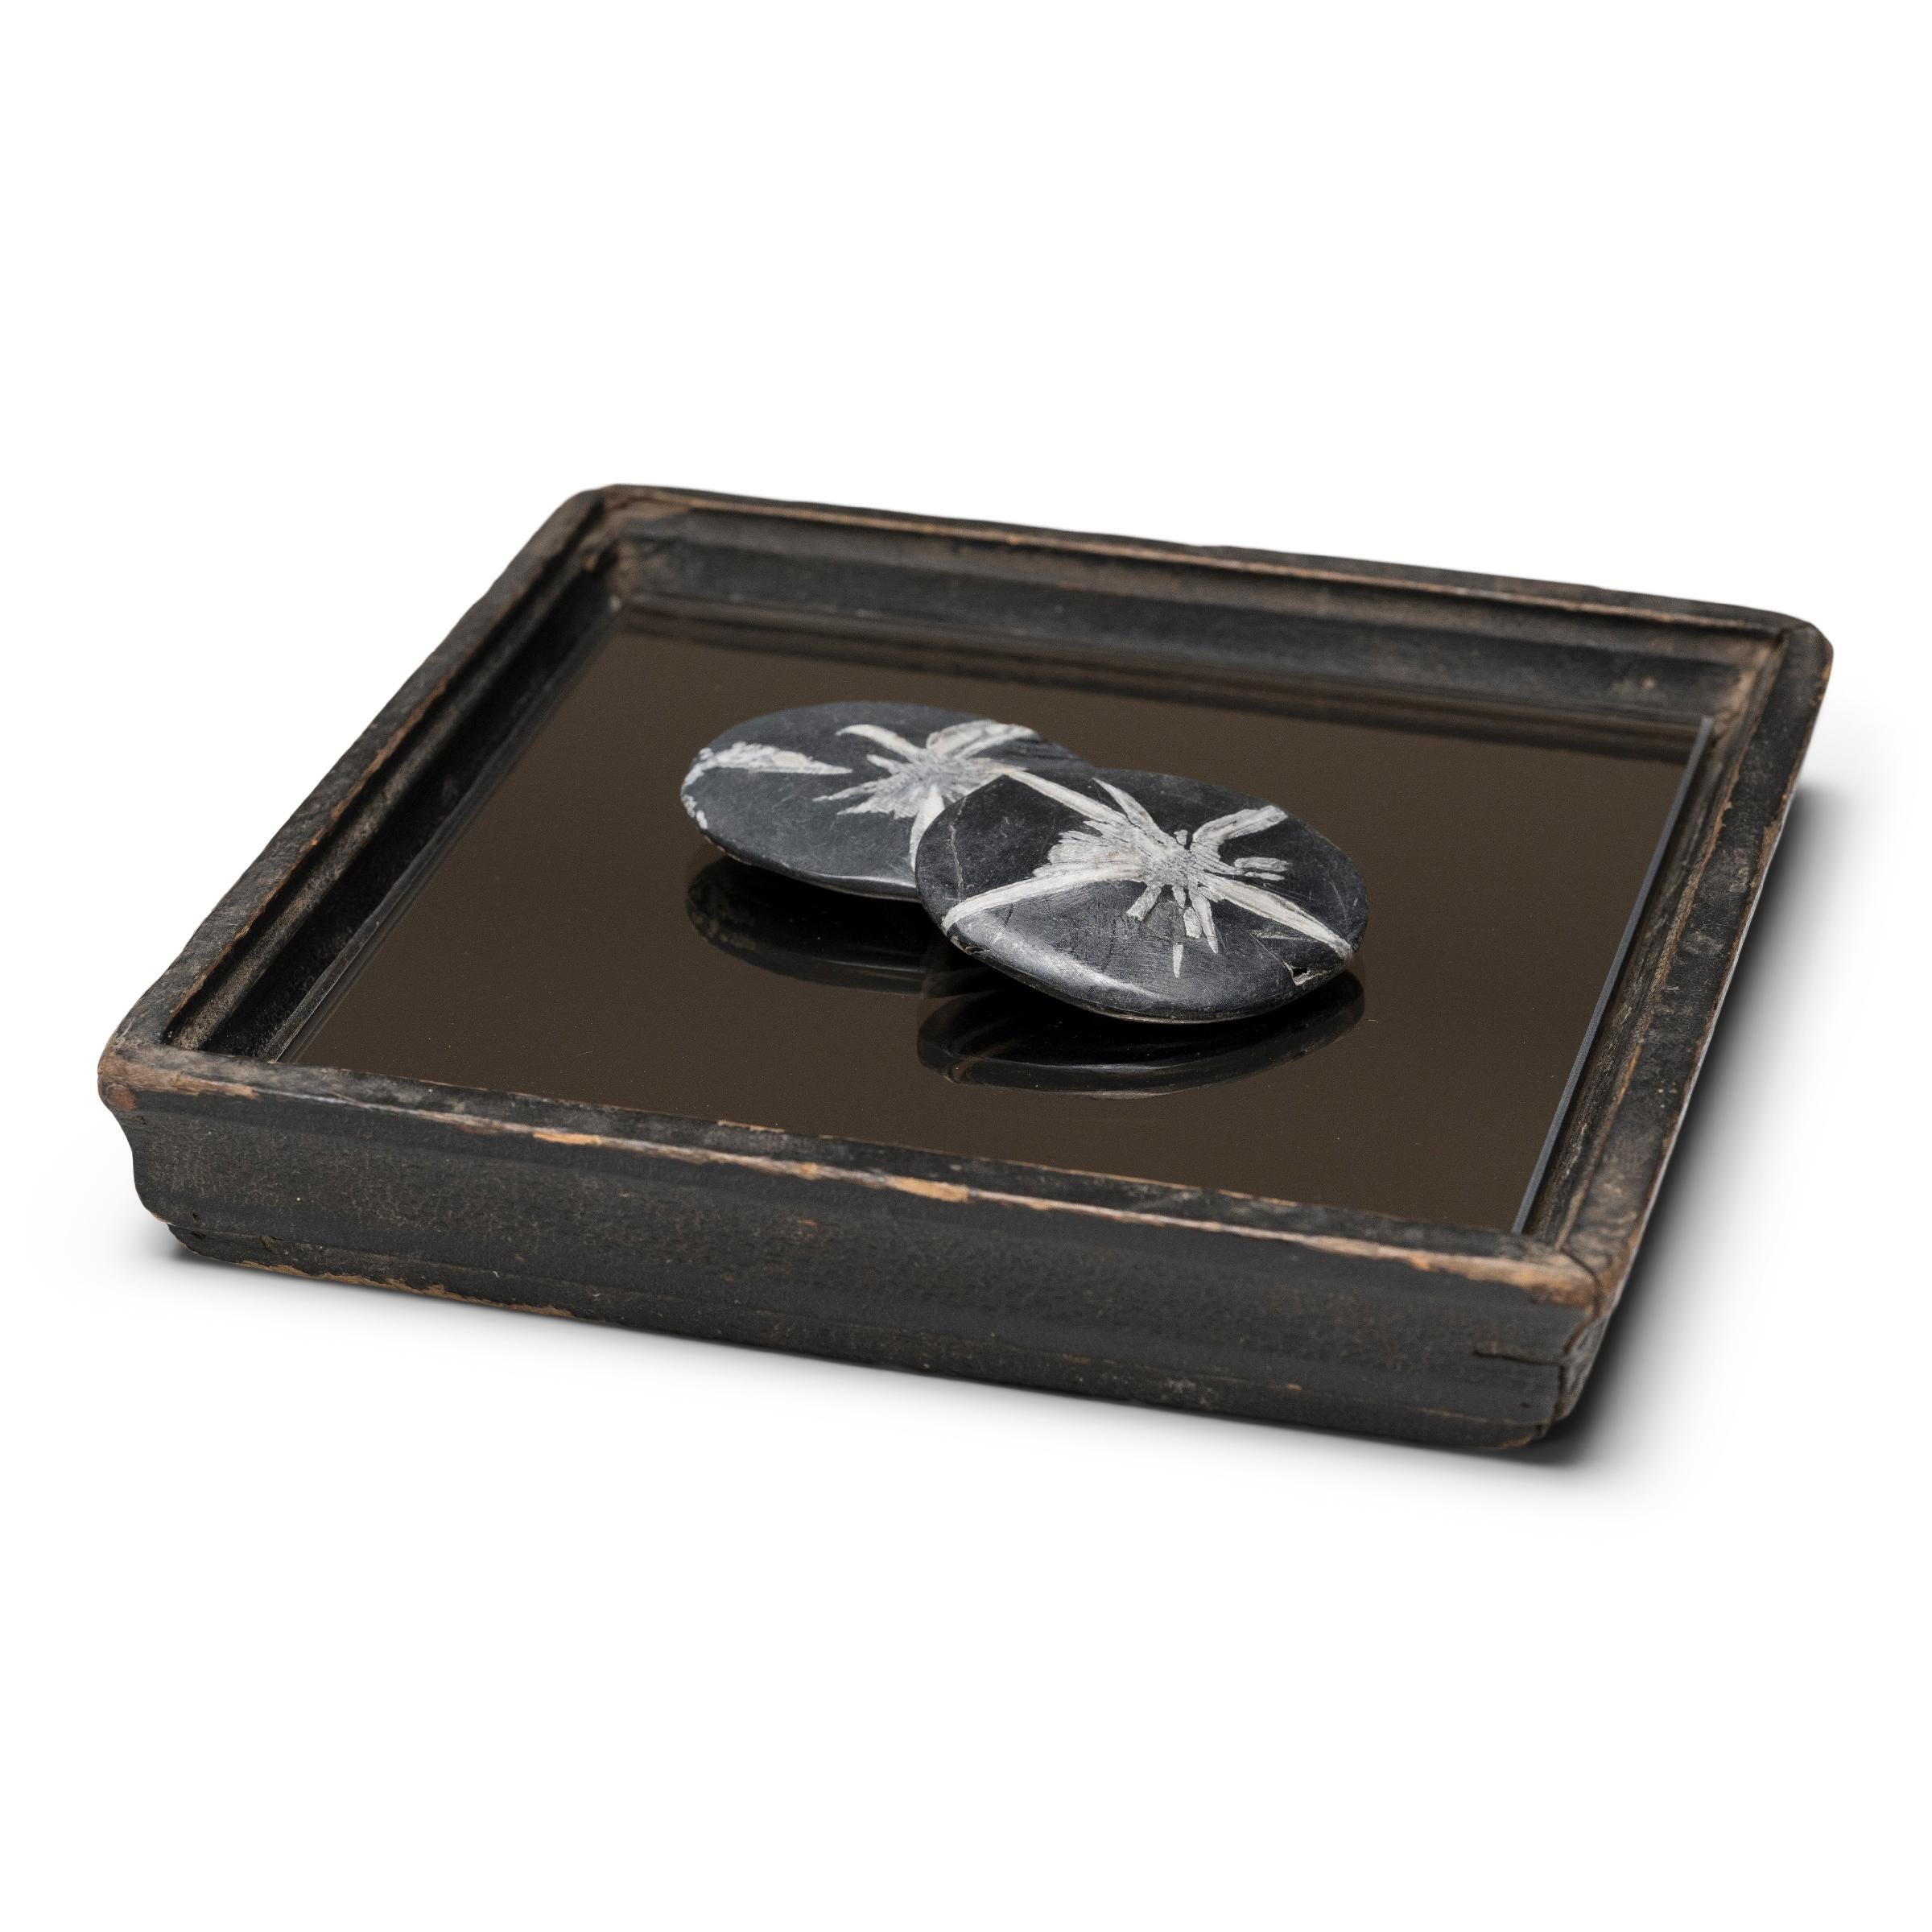 Simple lines, a modest form, and a layer of hand-brushed lacquer give this petite Qing-dynasty tray a provincial charm that recalls the warmth of home. The dark brown lacquer finish has weathered with time to reveal the light brown coloring of its